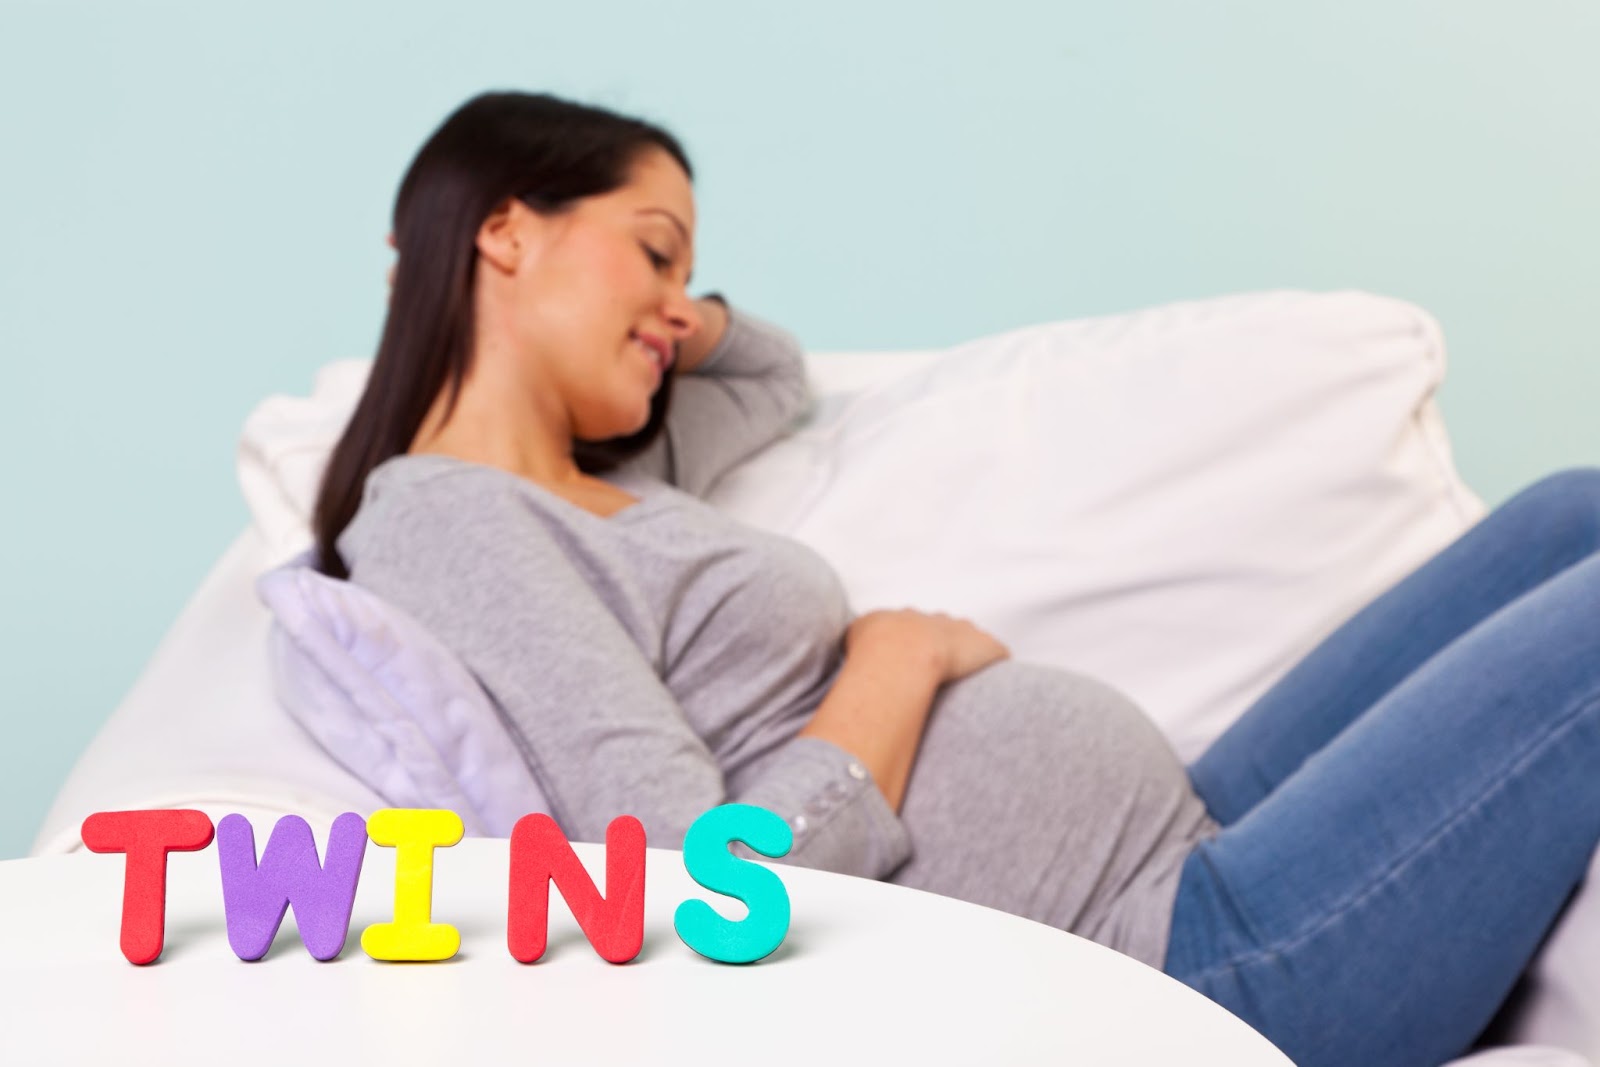 Pregnant woman looks down at her belly and smiles behind letters spelling out “Twins”.